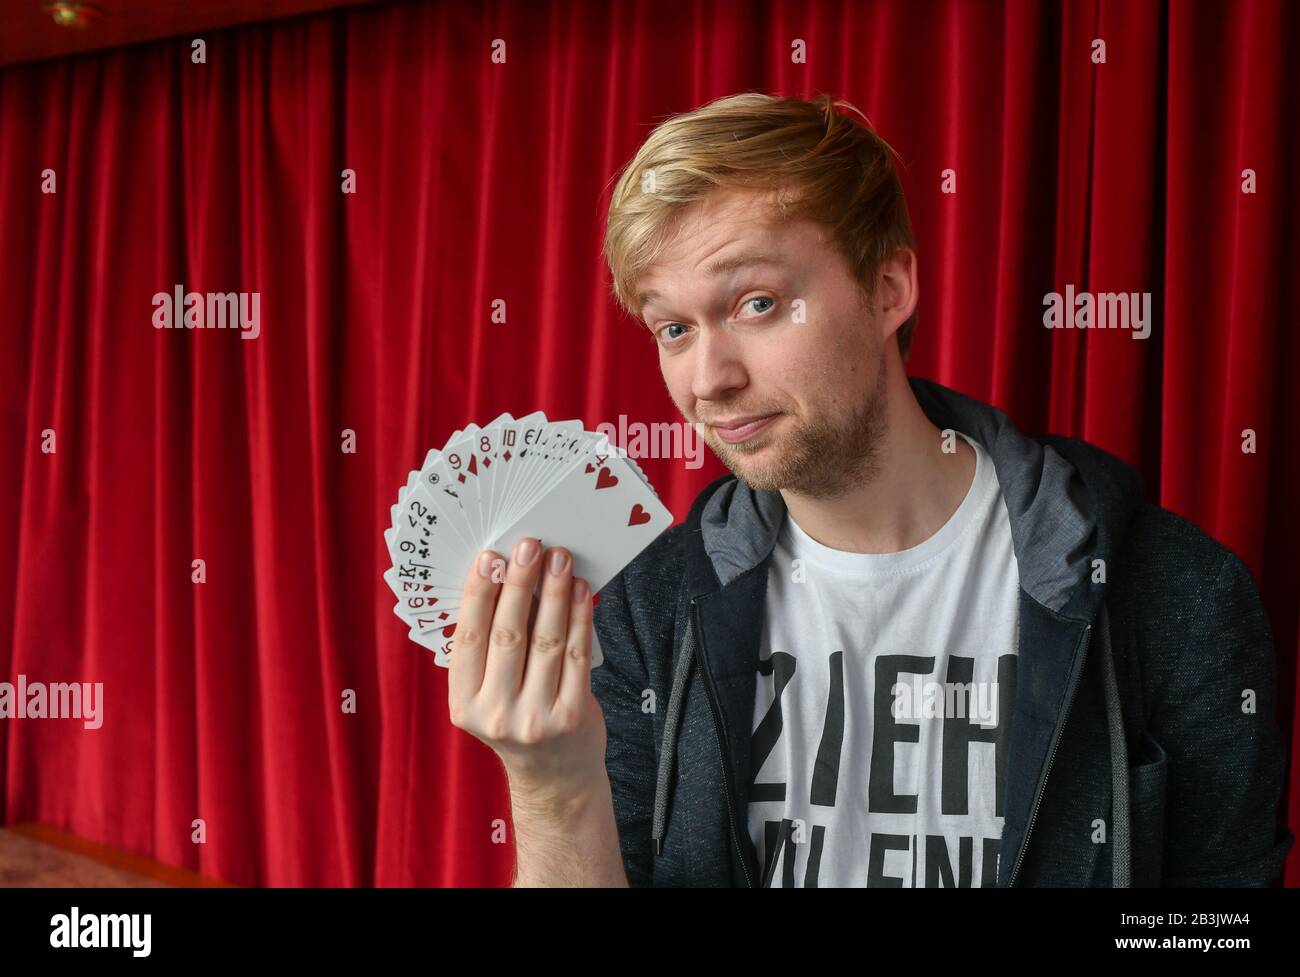 Berlin, Germany. 04th Mar, 2020. Marc Weide, German magician, entertainer and television presenter, at a photo session in the cabaret Wühlmäuse. In 2018 he became 'World Champion of Magic' in the Parlour Magic category. This year, he is touring Germany with his programme 'Can you live on it??? Credit: Jens Kalaene/dpa-Zentralbild/ZB/dpa/Alamy Live News Stock Photo